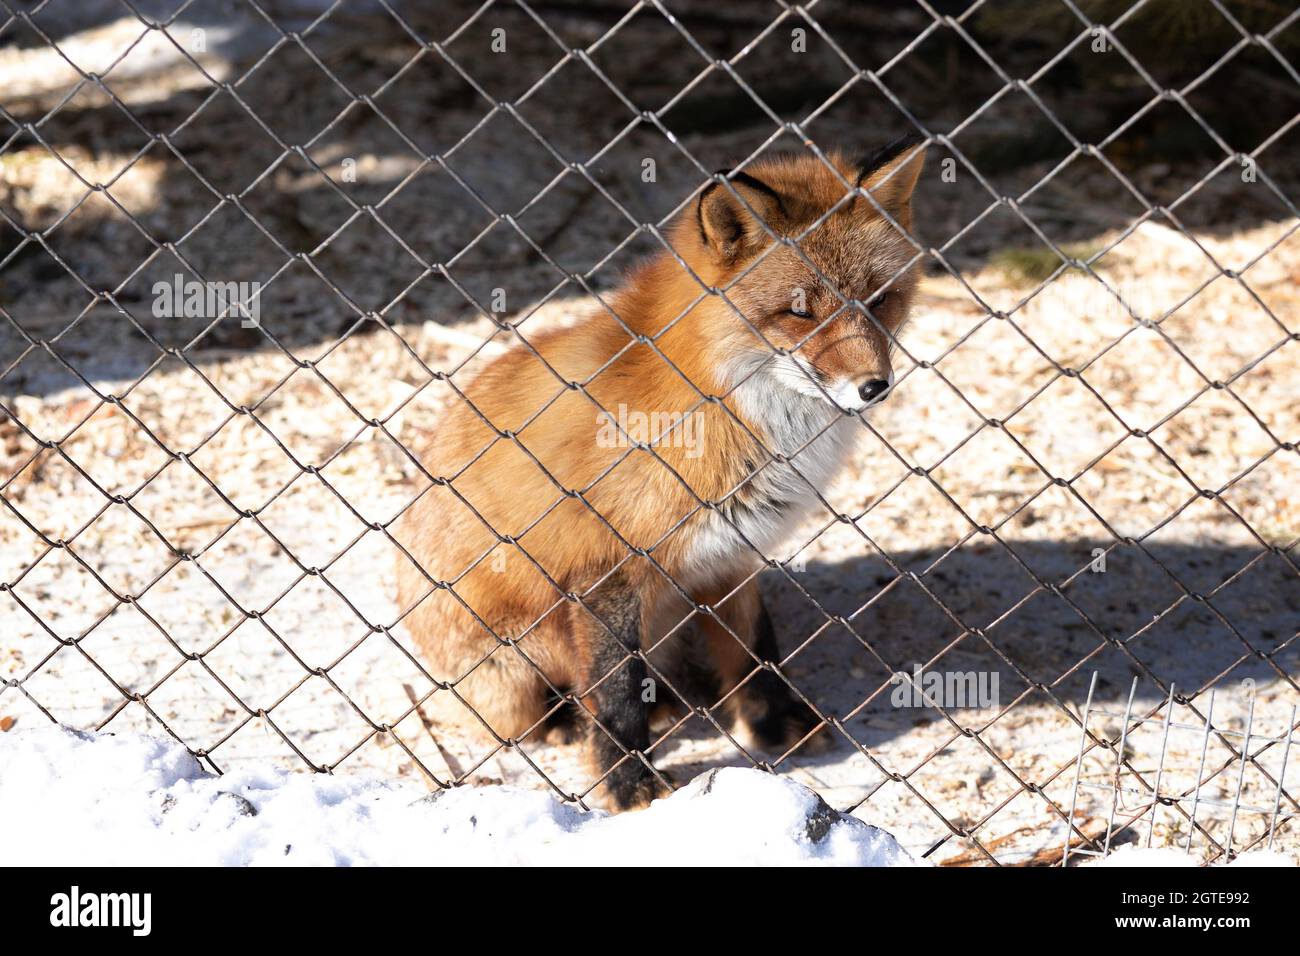 Young Red Fox In The Zoo Enclosure On A Sunny Winter Day Looks At Freedom  Stock Photo - Alamy